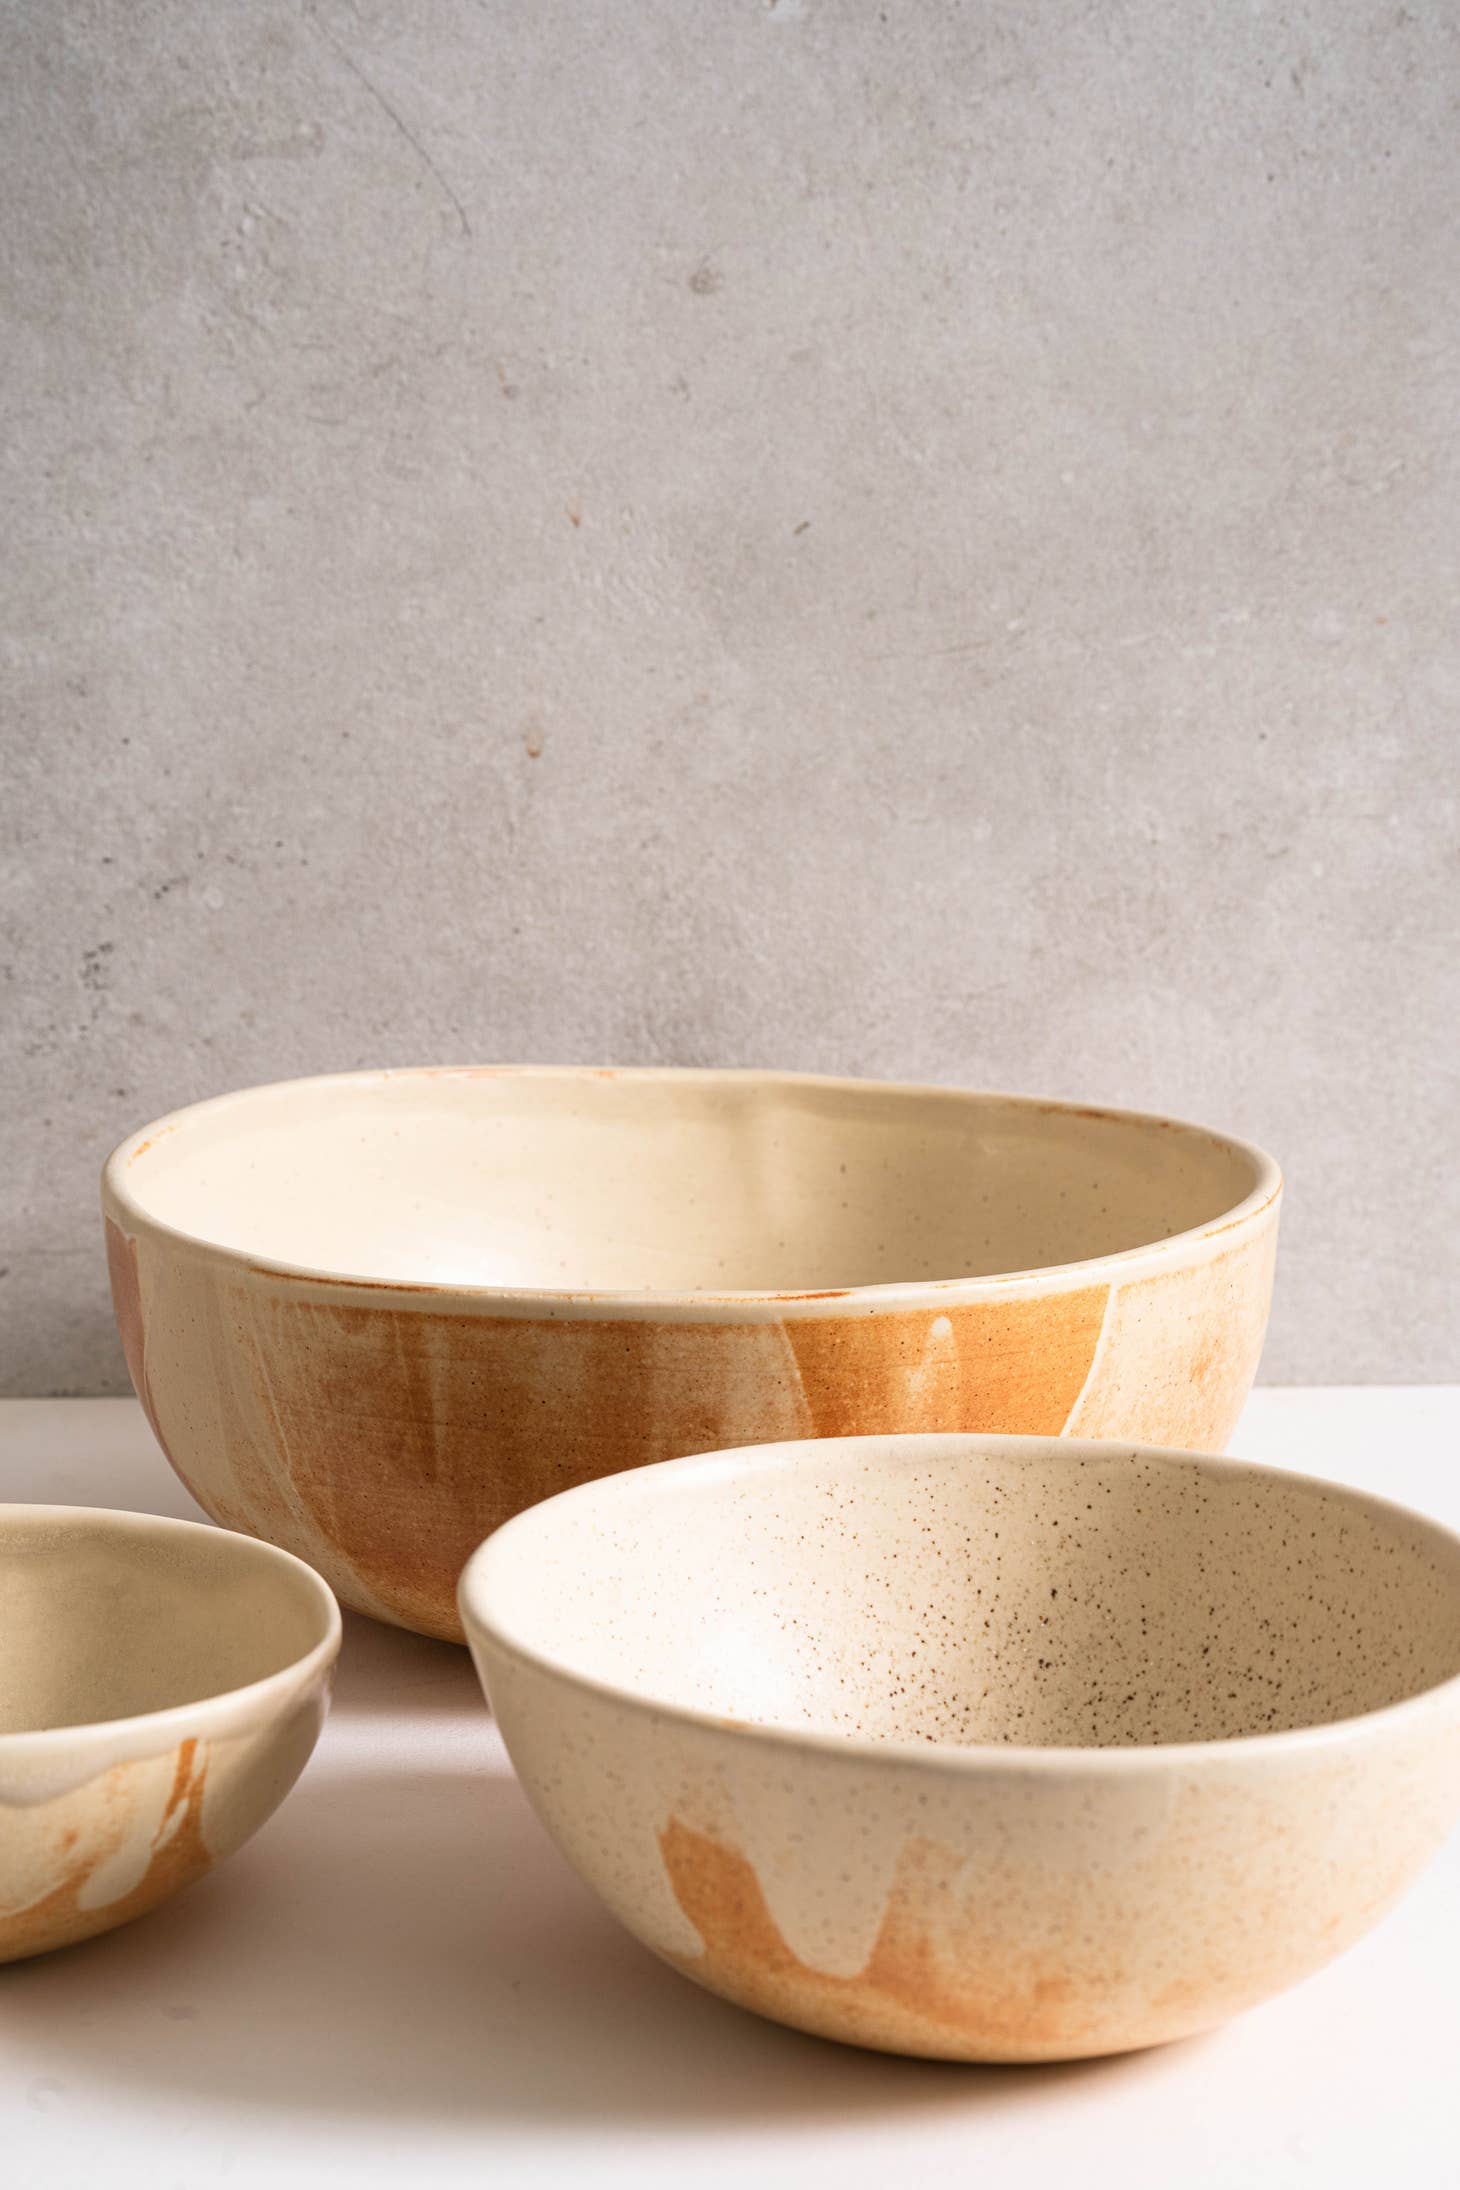 Set of 3 ceramic nesting bowls with a caramel beige matte finish. Hand-dipped in a reactive glaze that swirls uniquely across each piece and leaves beautiful rust color strokes. Handmade in Ukraine.